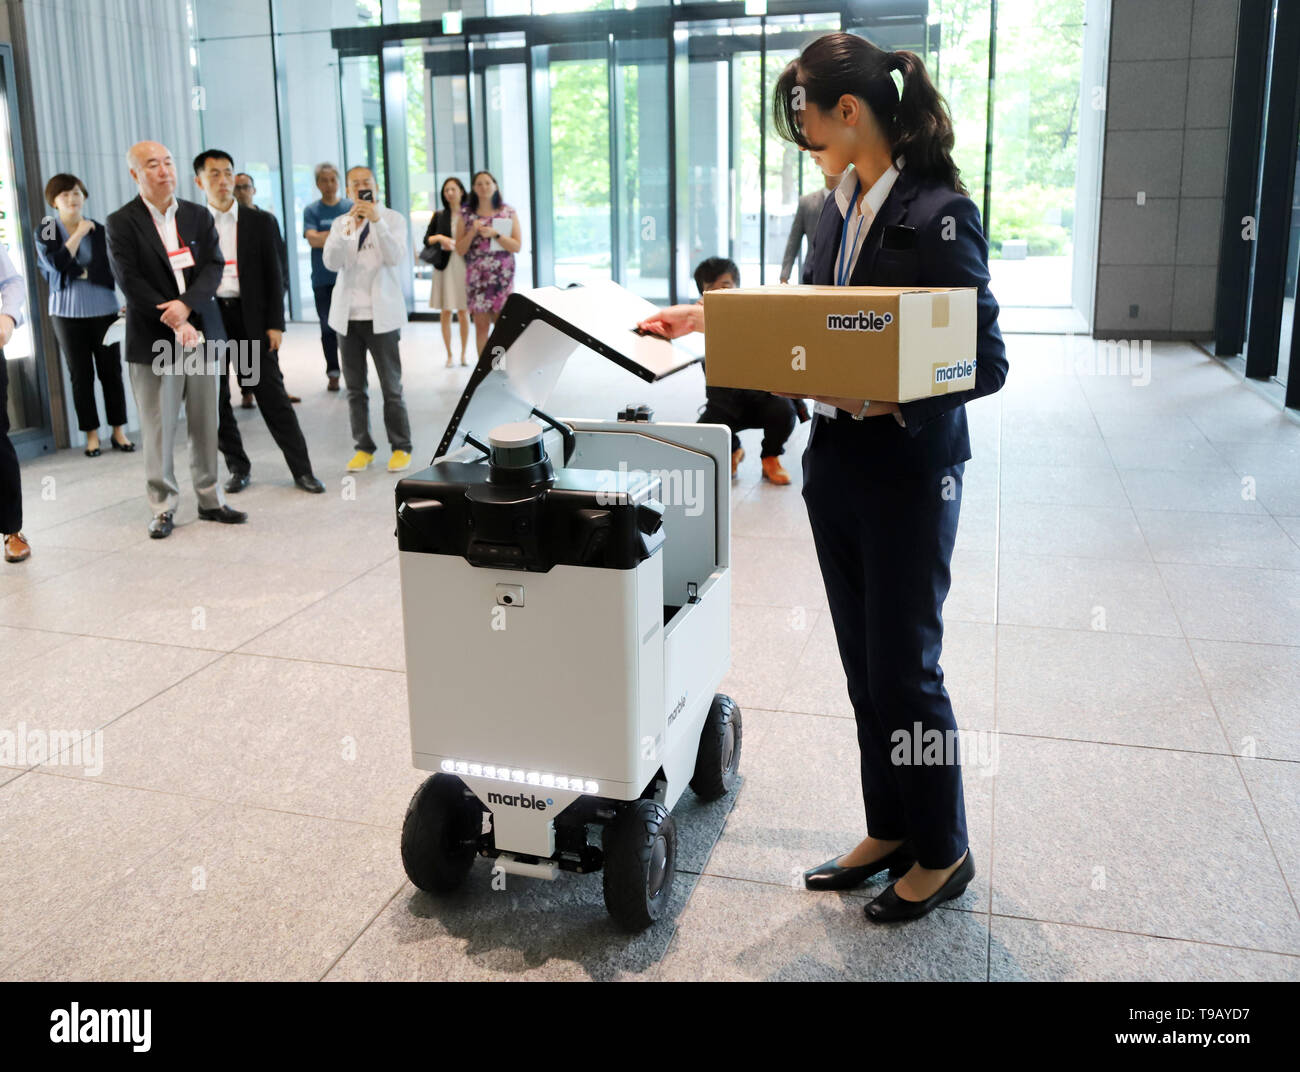 Tokyo, Japan. 17th May, 2019. Japan's Mitsubishi Estate demonstrates US  robotics venture Marble's delivery robot "Marble" which has LiDAR sensors  and cameras to drive autonomously at the company's office buildings at  Tokyo's